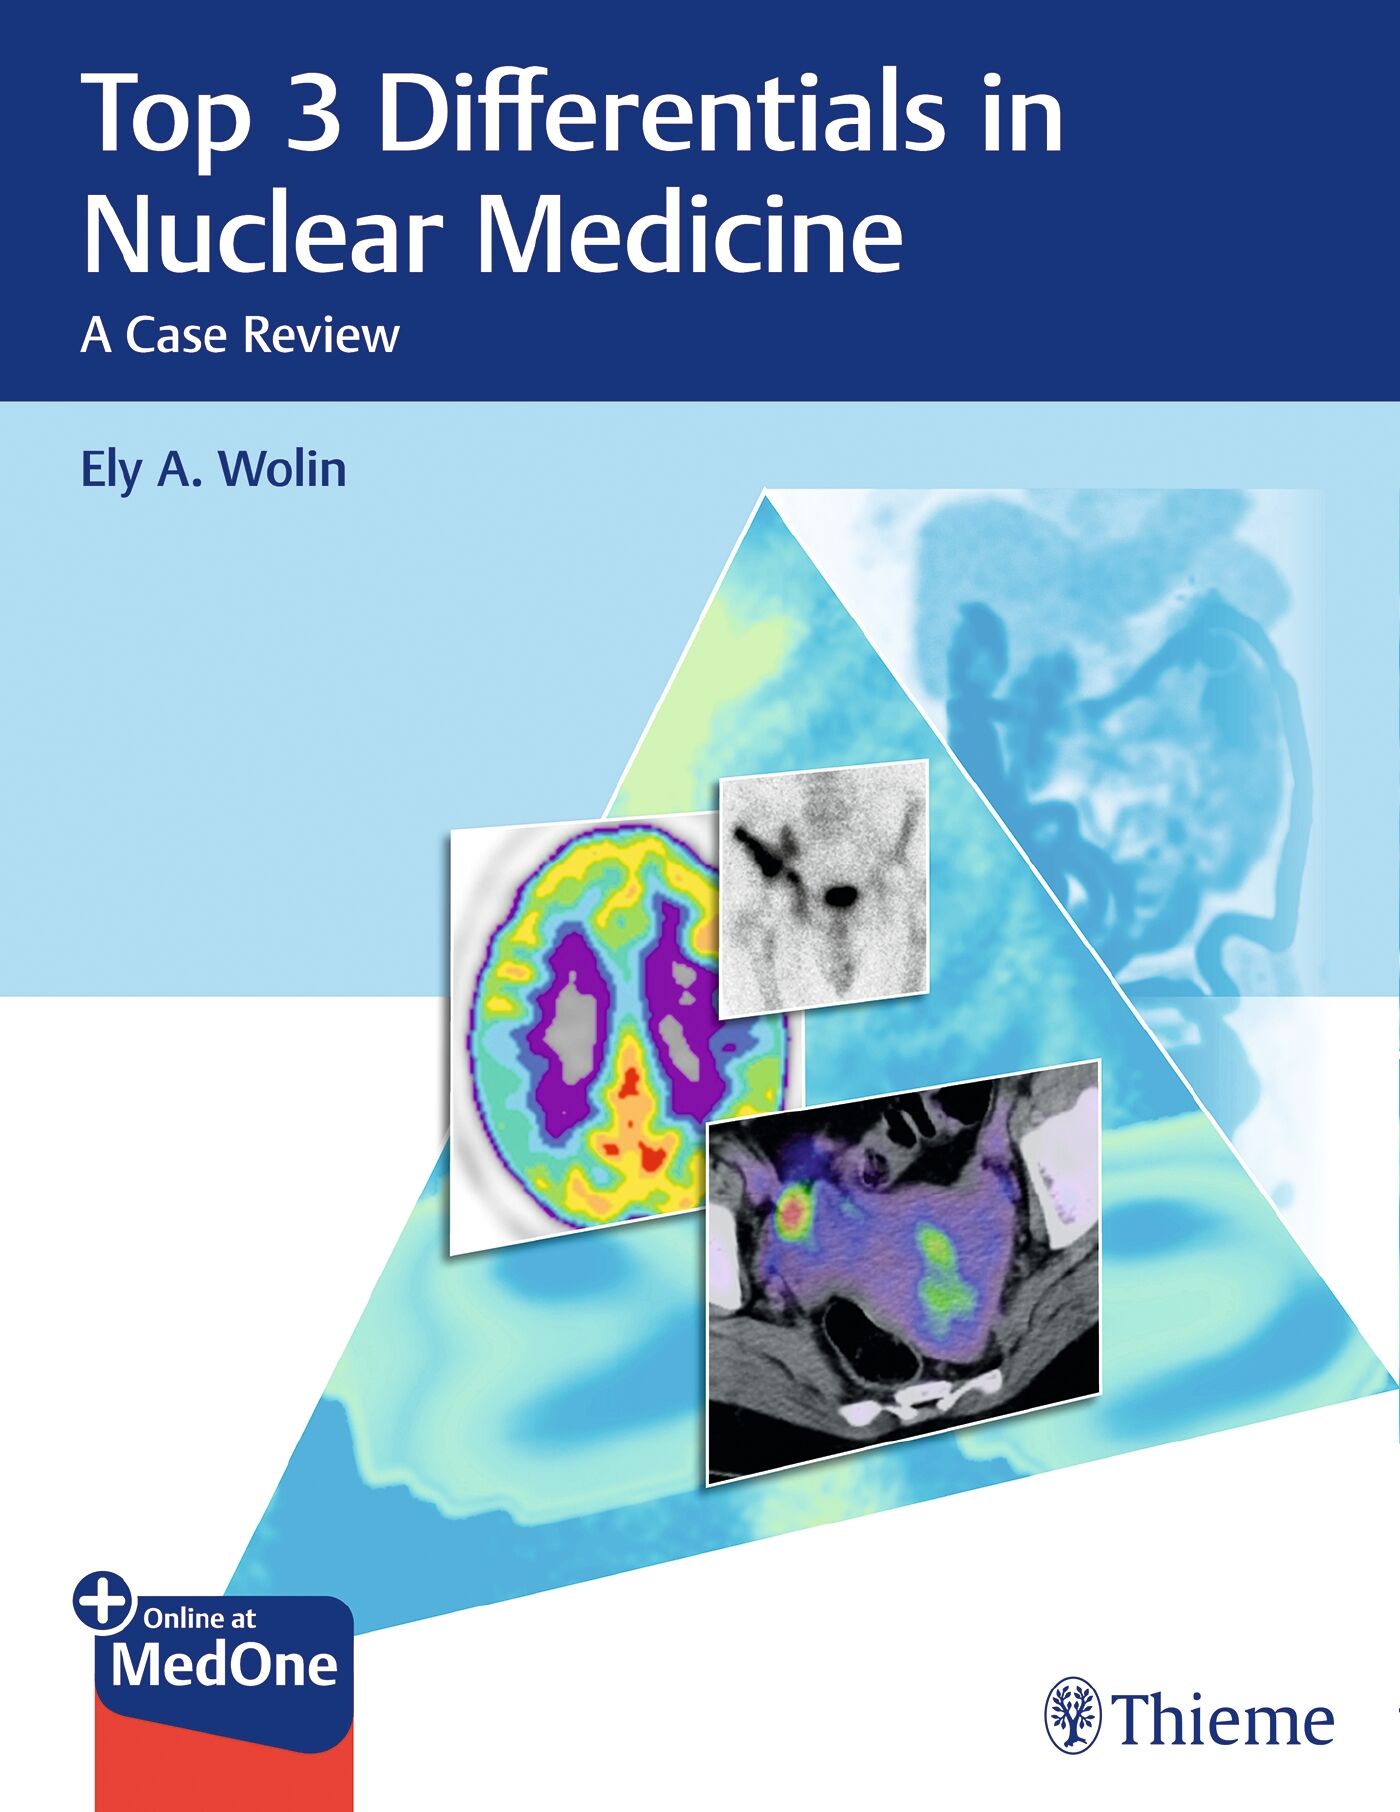 Top 3 Differentials in Nuclear Medicine, 9781626233447